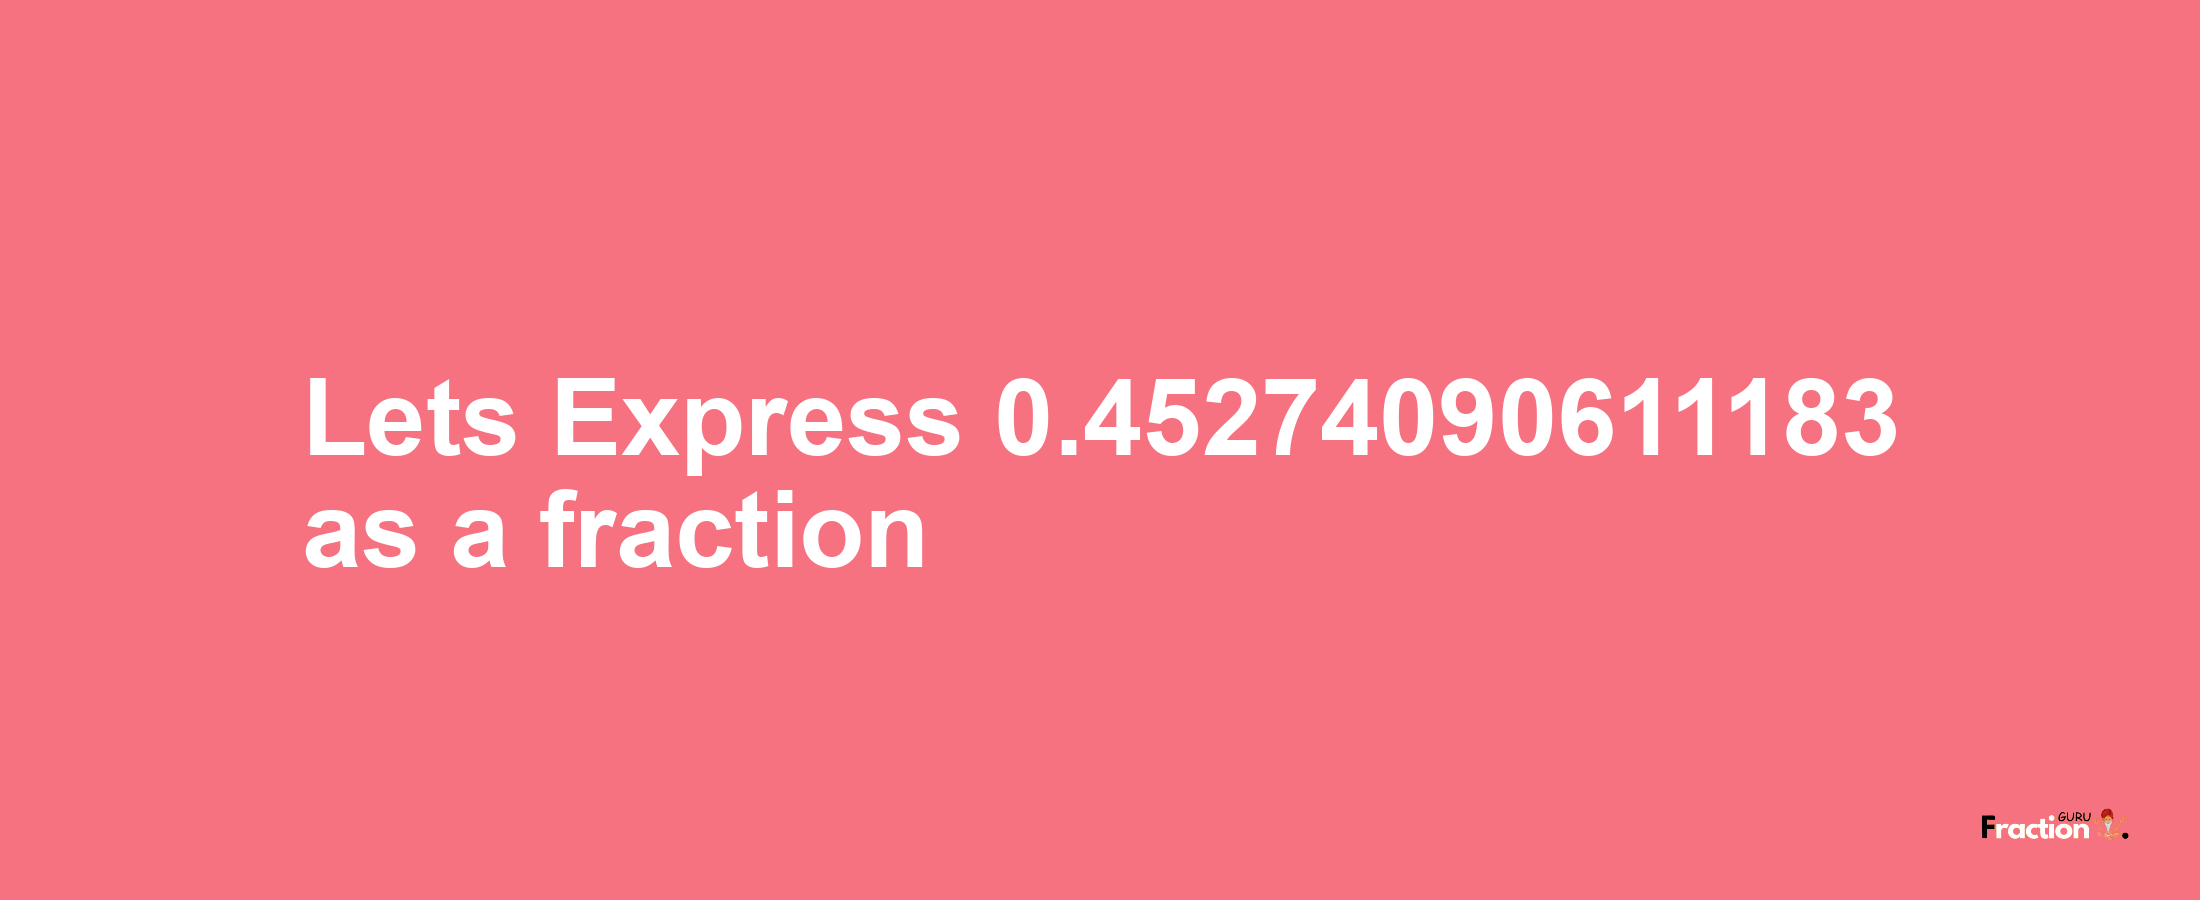 Lets Express 0.45274090611183 as afraction